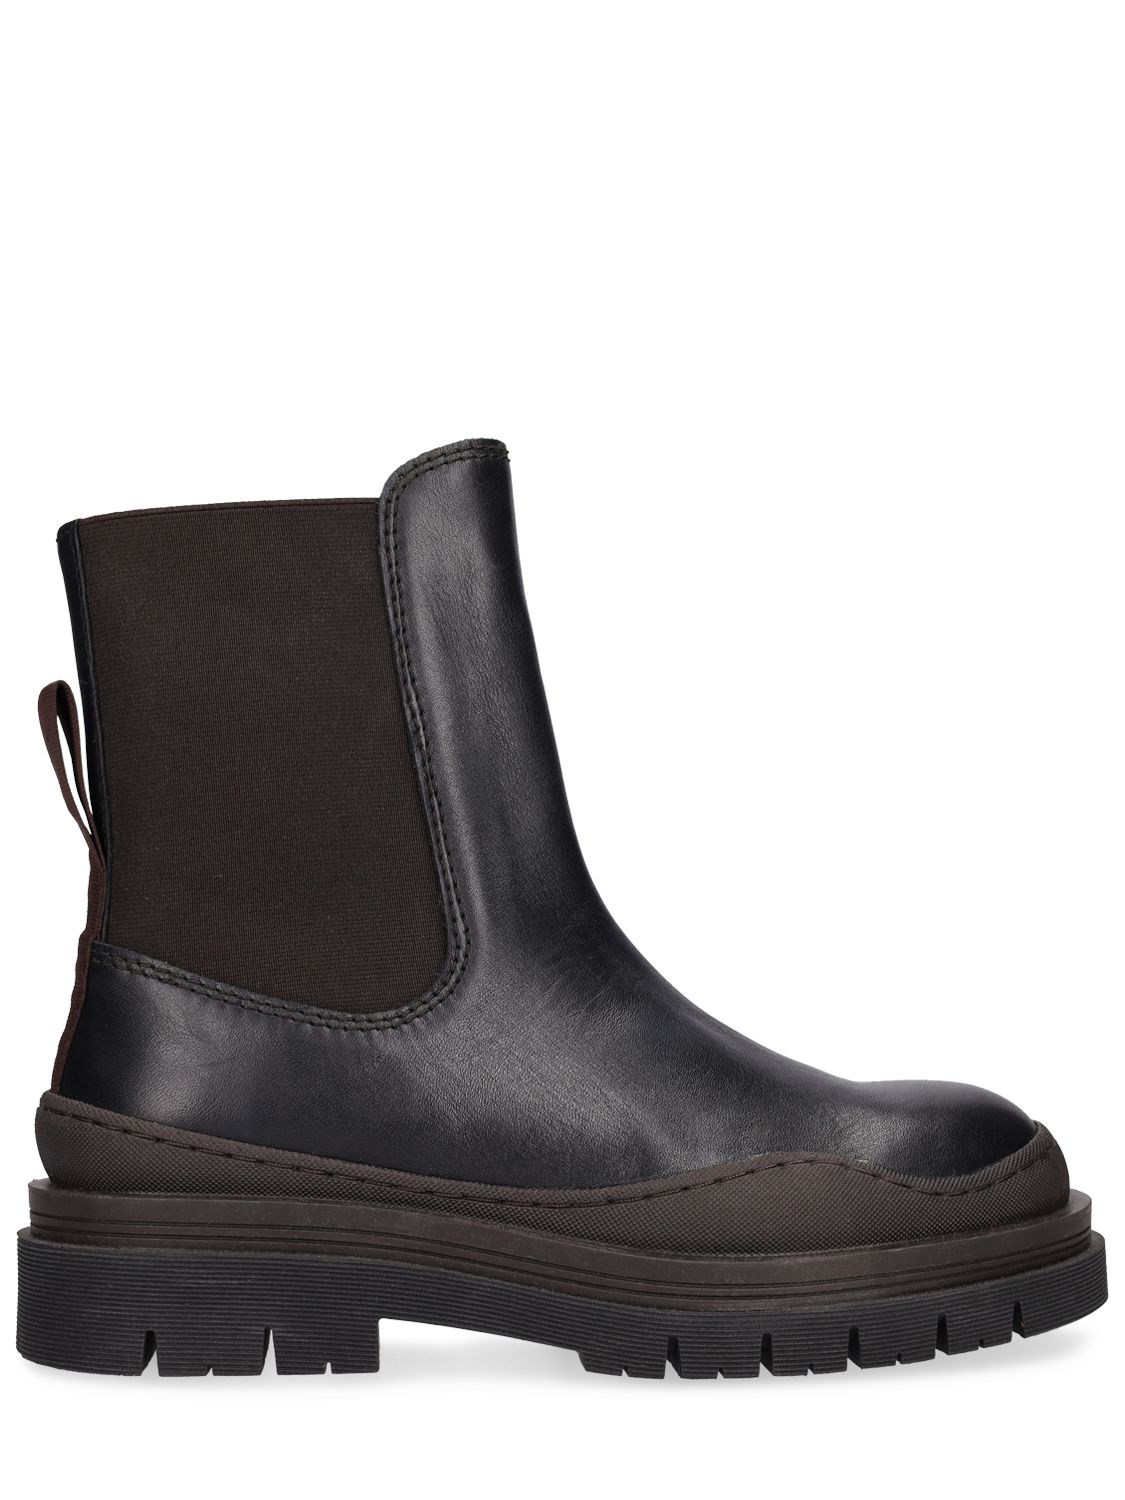 Mm Alli Leather Chelsea Boots - SEE BY CHLOÉ - Modalova